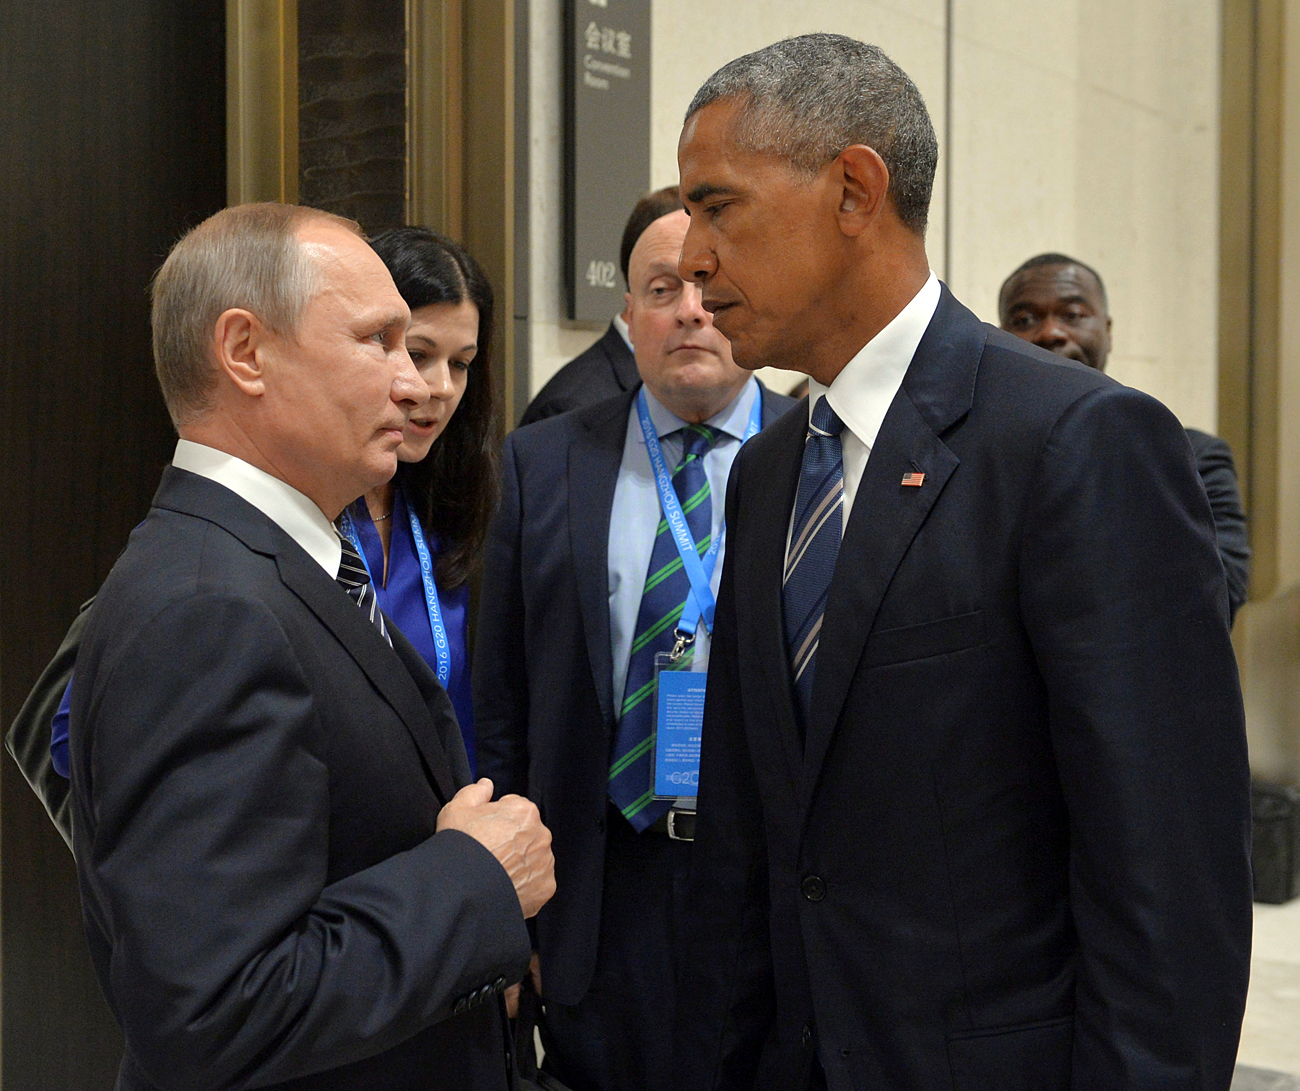 Lack of trust between the Russians and the Americans is a fundamental obstacle to reaching an understanding that could resolve the Syrian conflict. Photo: Russian President Vladimir Putin meets with U.S. President Barack Obama on the sidelines of the G20 Summit in Hangzhou, China, on Spet. 5, 2016.